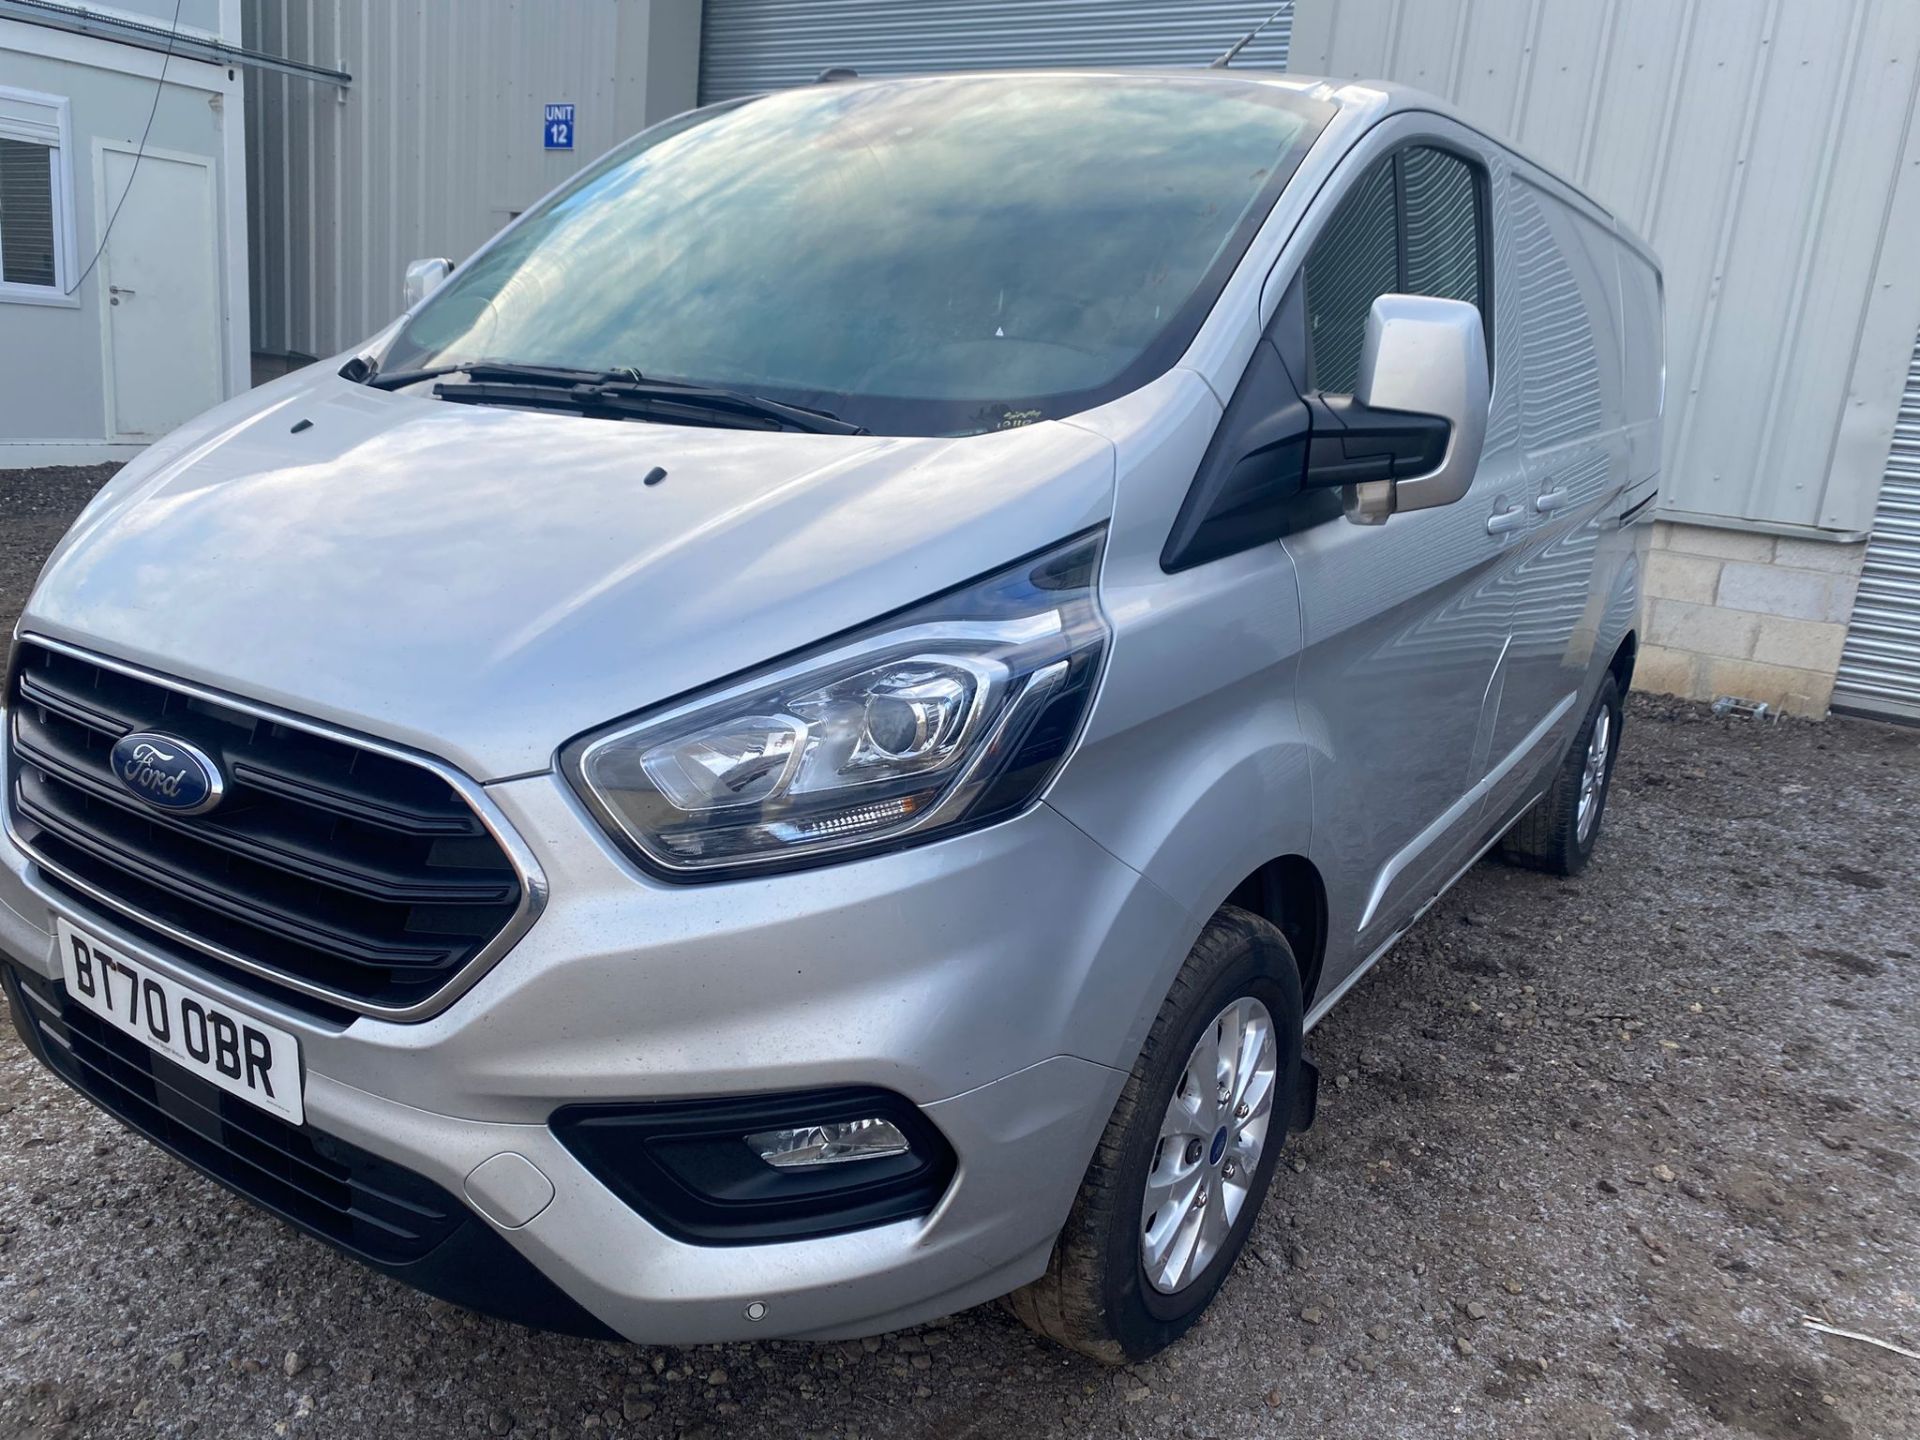 2020 70 FORD TRANSIT CUSTOM LIMITED PANEL VAN - 58K MILES - AIR CON - PLY LINED - ALLOY WHEELS